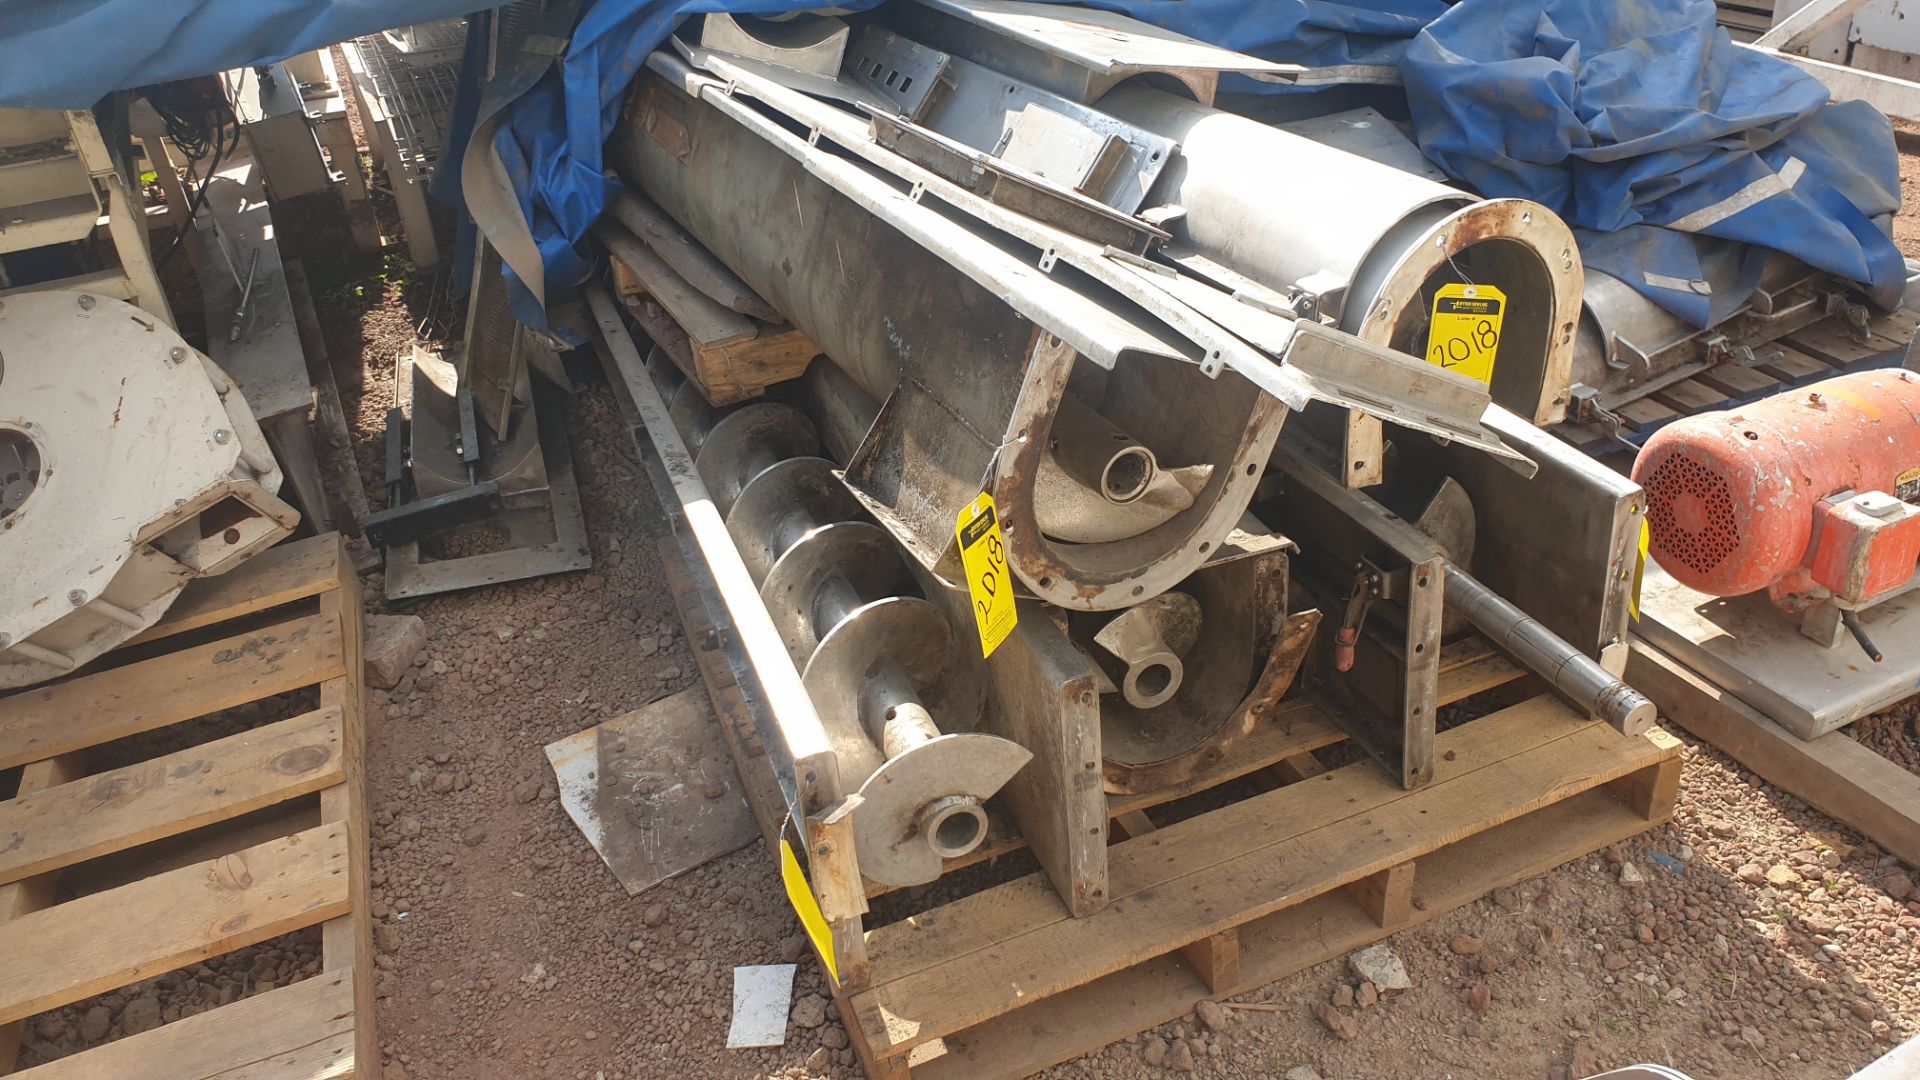 5 staineless steel screw feeder conveyors. Please inspect - Image 9 of 12